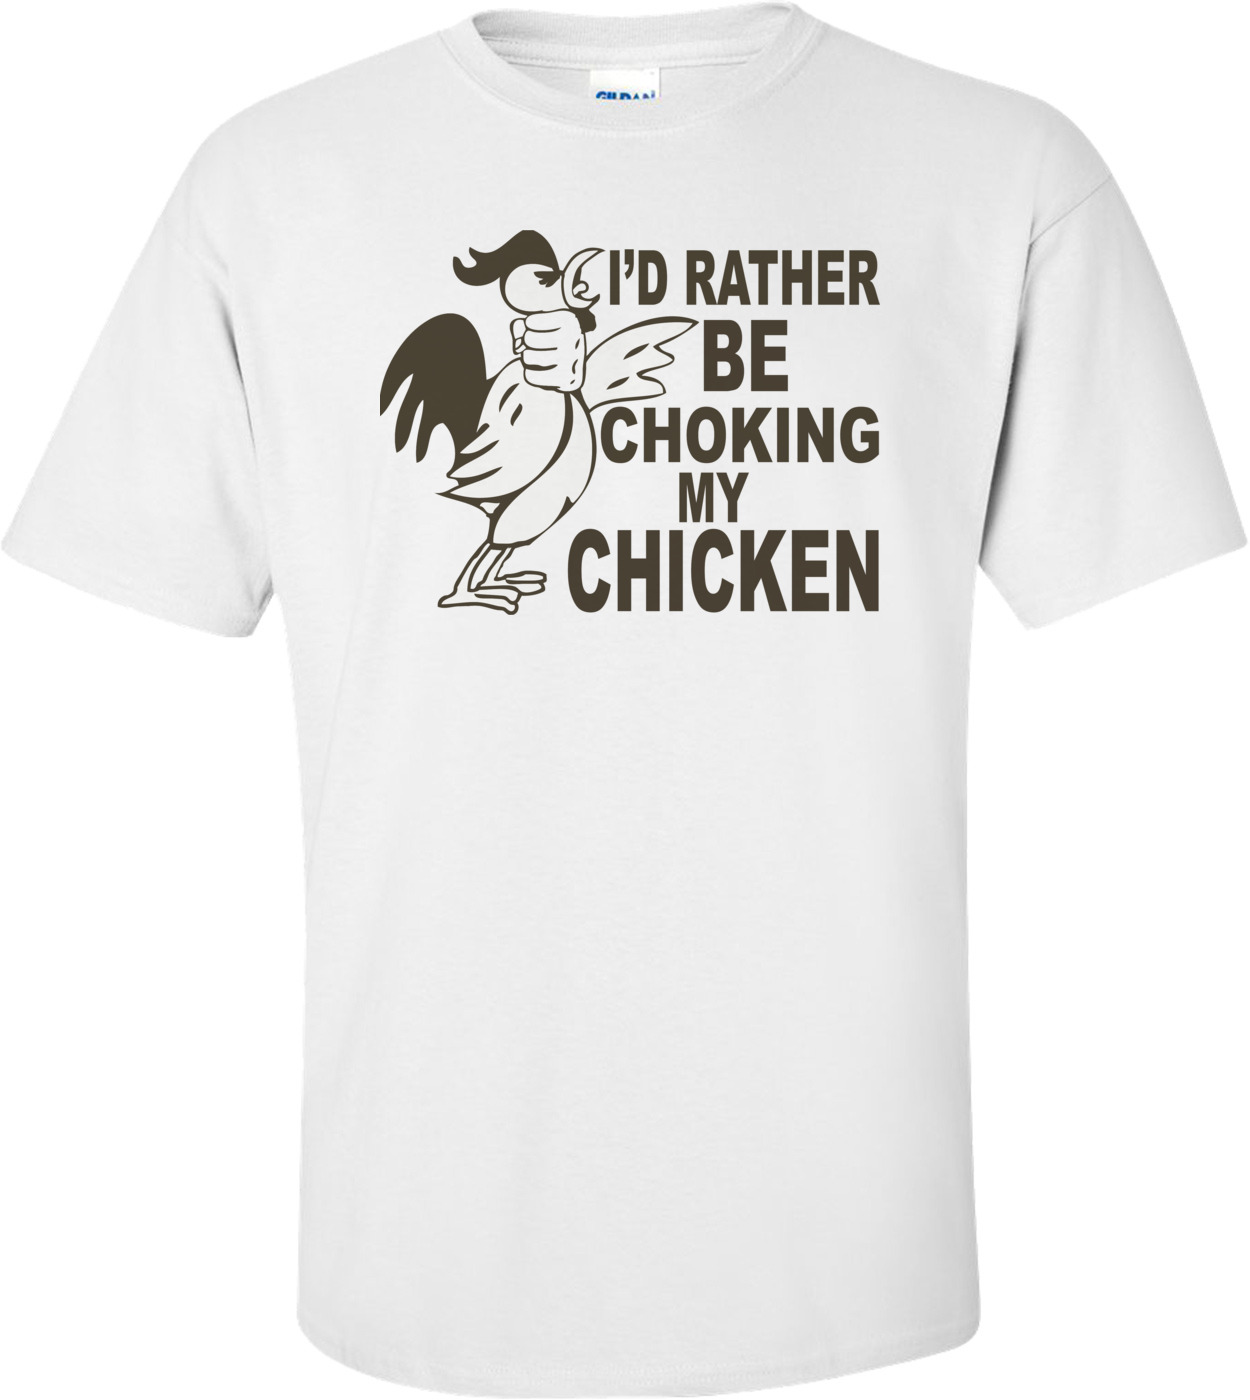 I'd Rather Be Choking My Chicken - Funny T-shirt